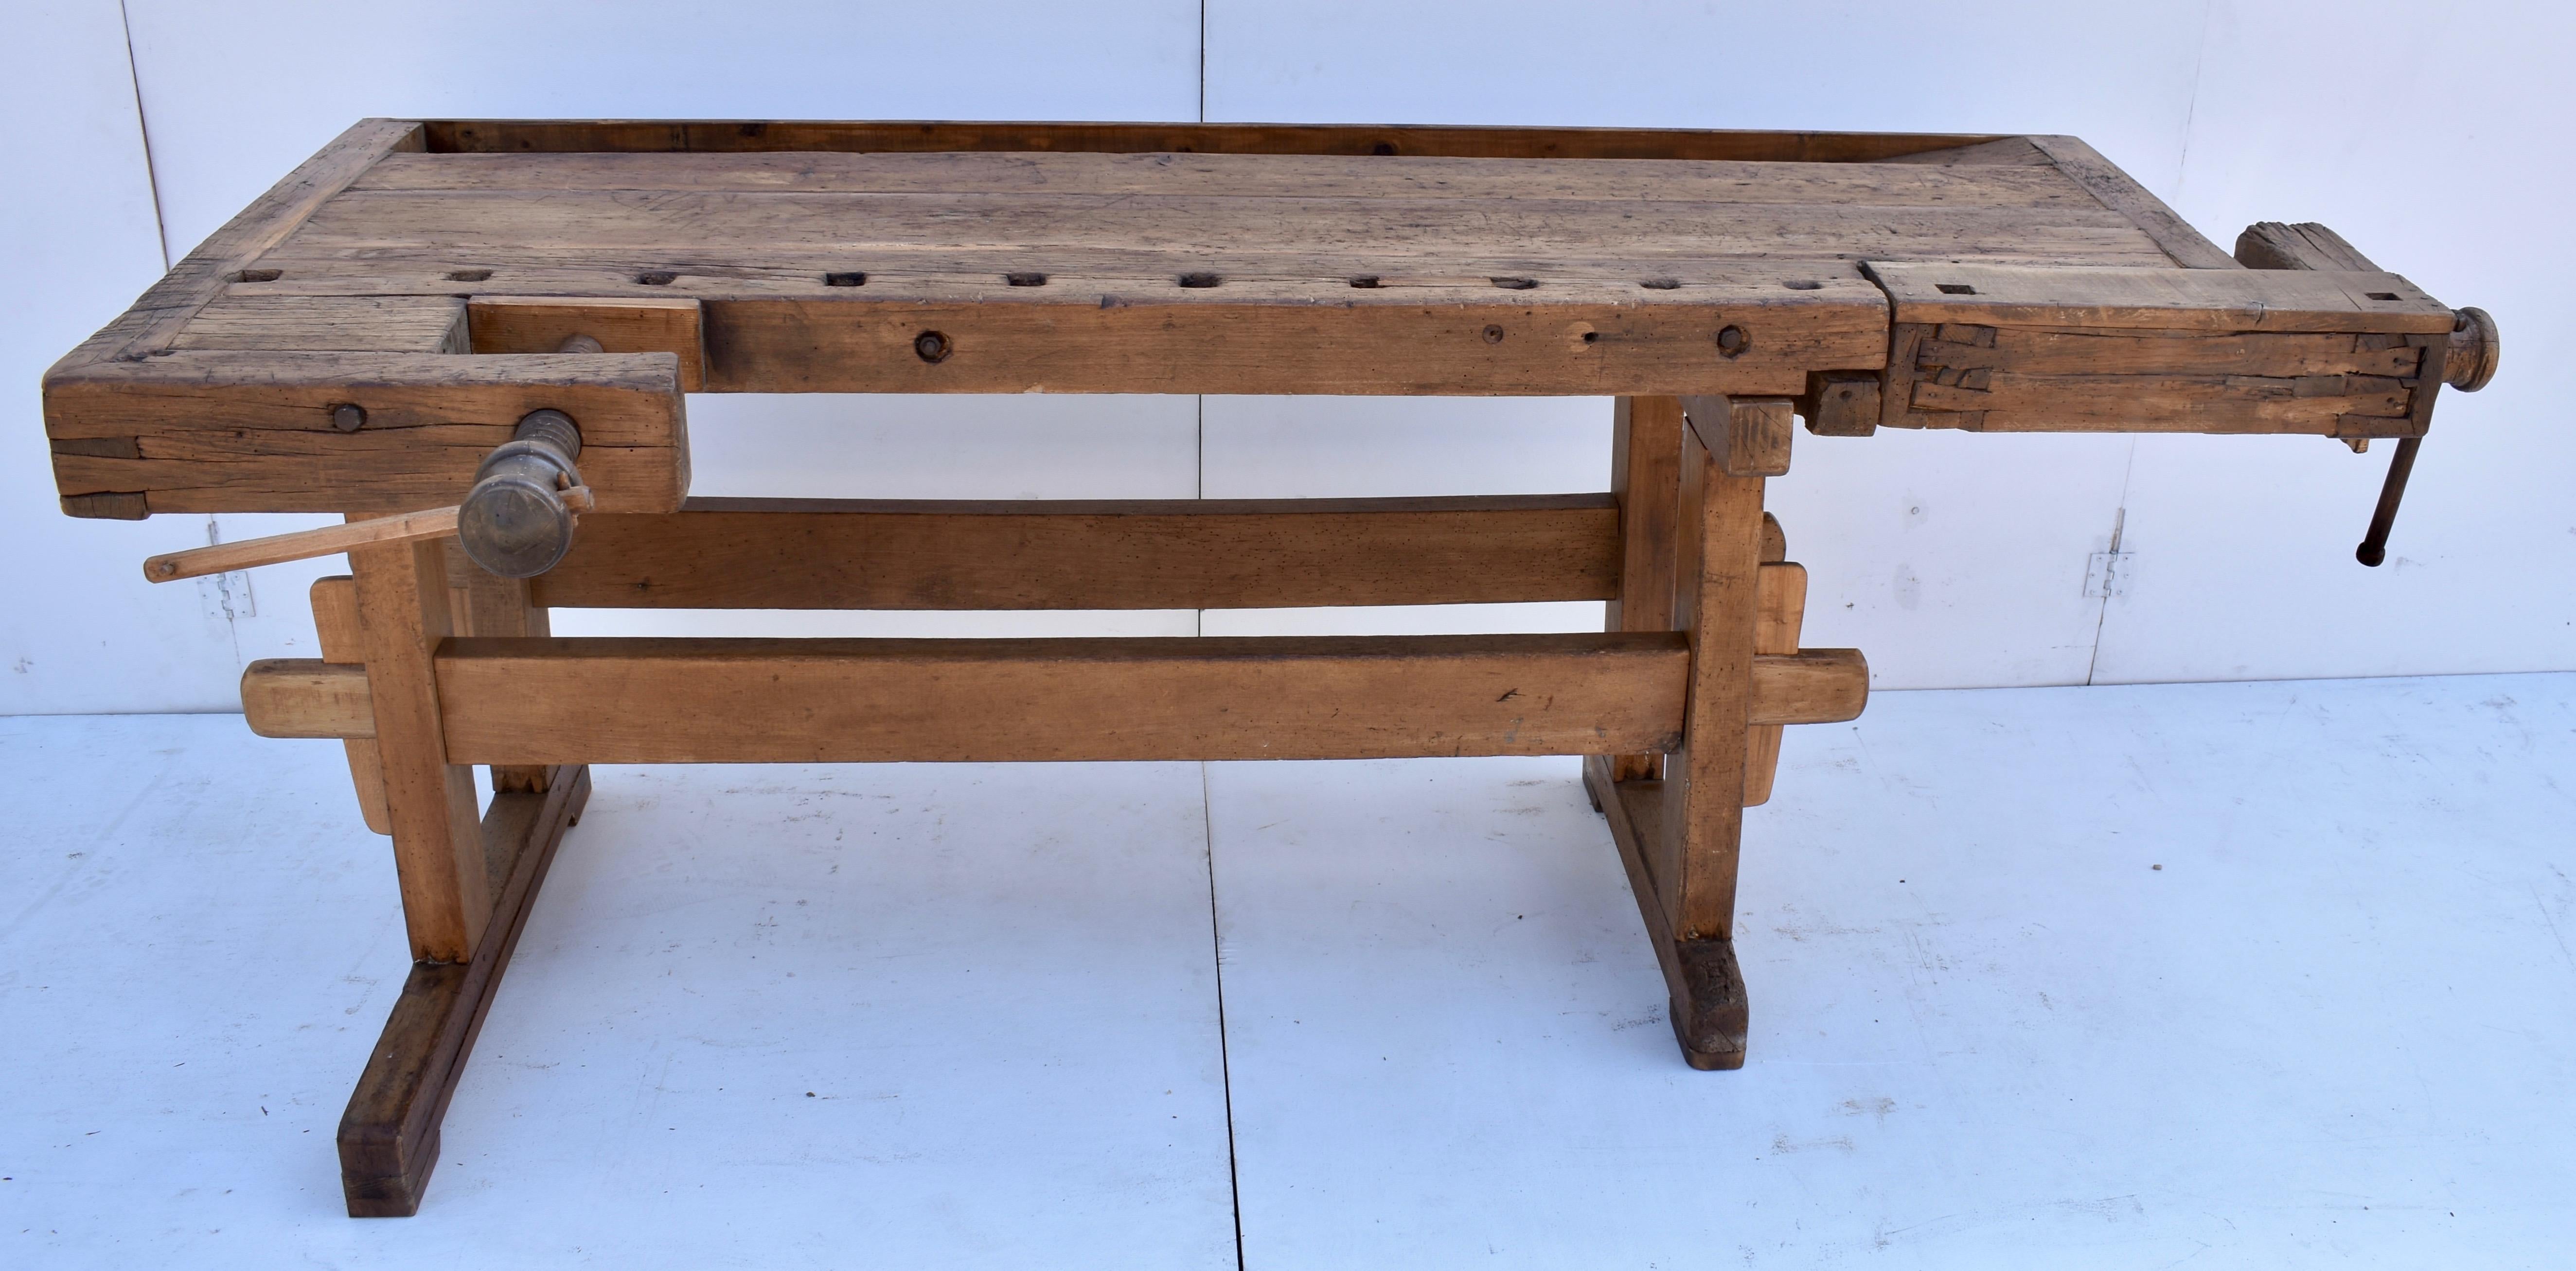 This joiner’s work bench is well-used but still in great super-sturdy condition without too much distress on the surface. The trestle-style base is made entirely of oak. The uprights are 4”x3”, hand-cut, through-tenoned and pegged top and bottom to